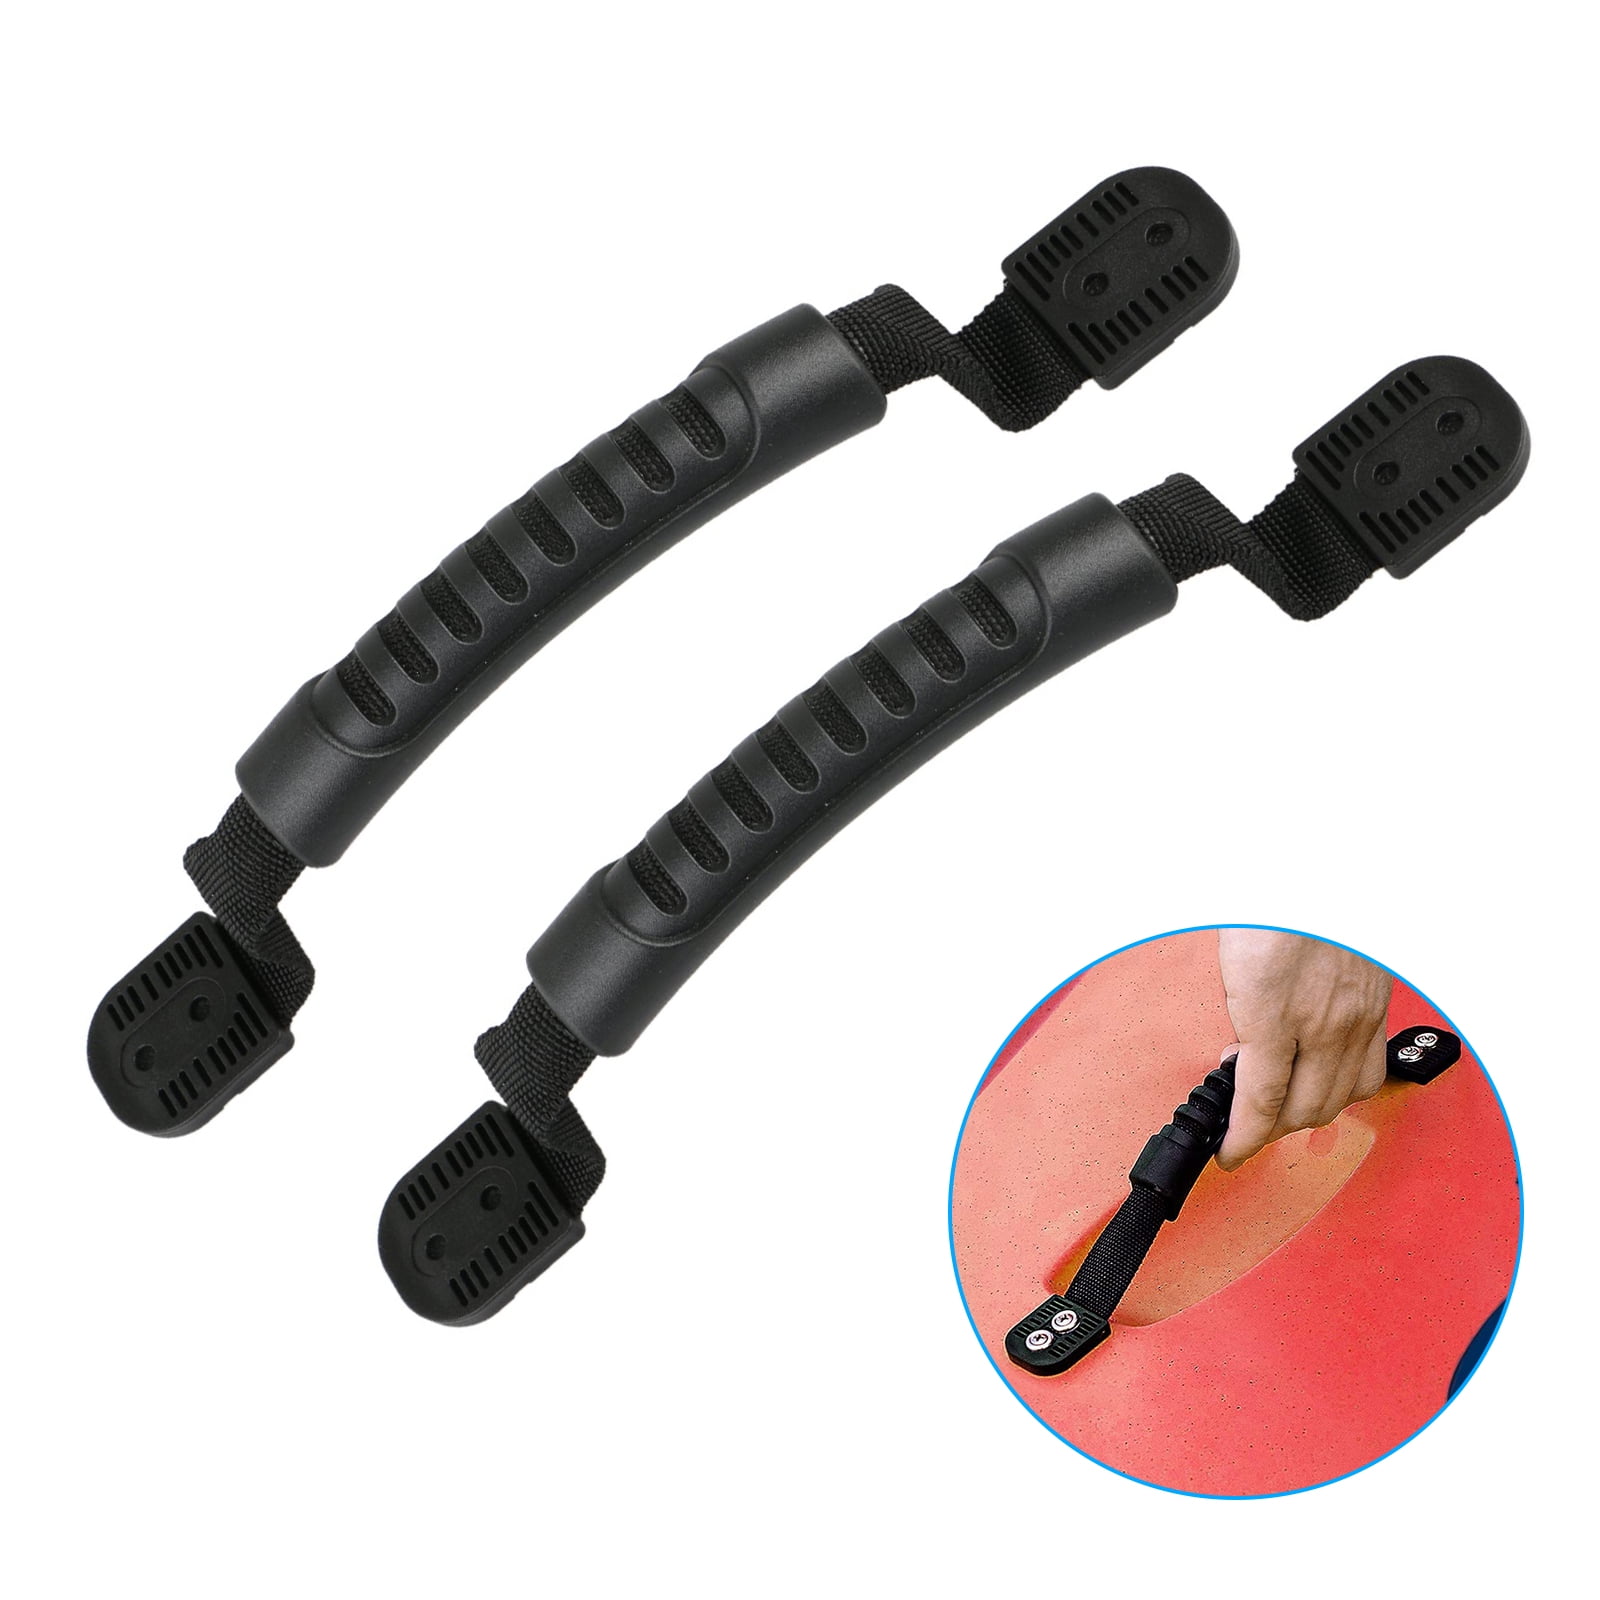 Kayak Handles Accessories Assembly Black Carry For Canoes High Quality 